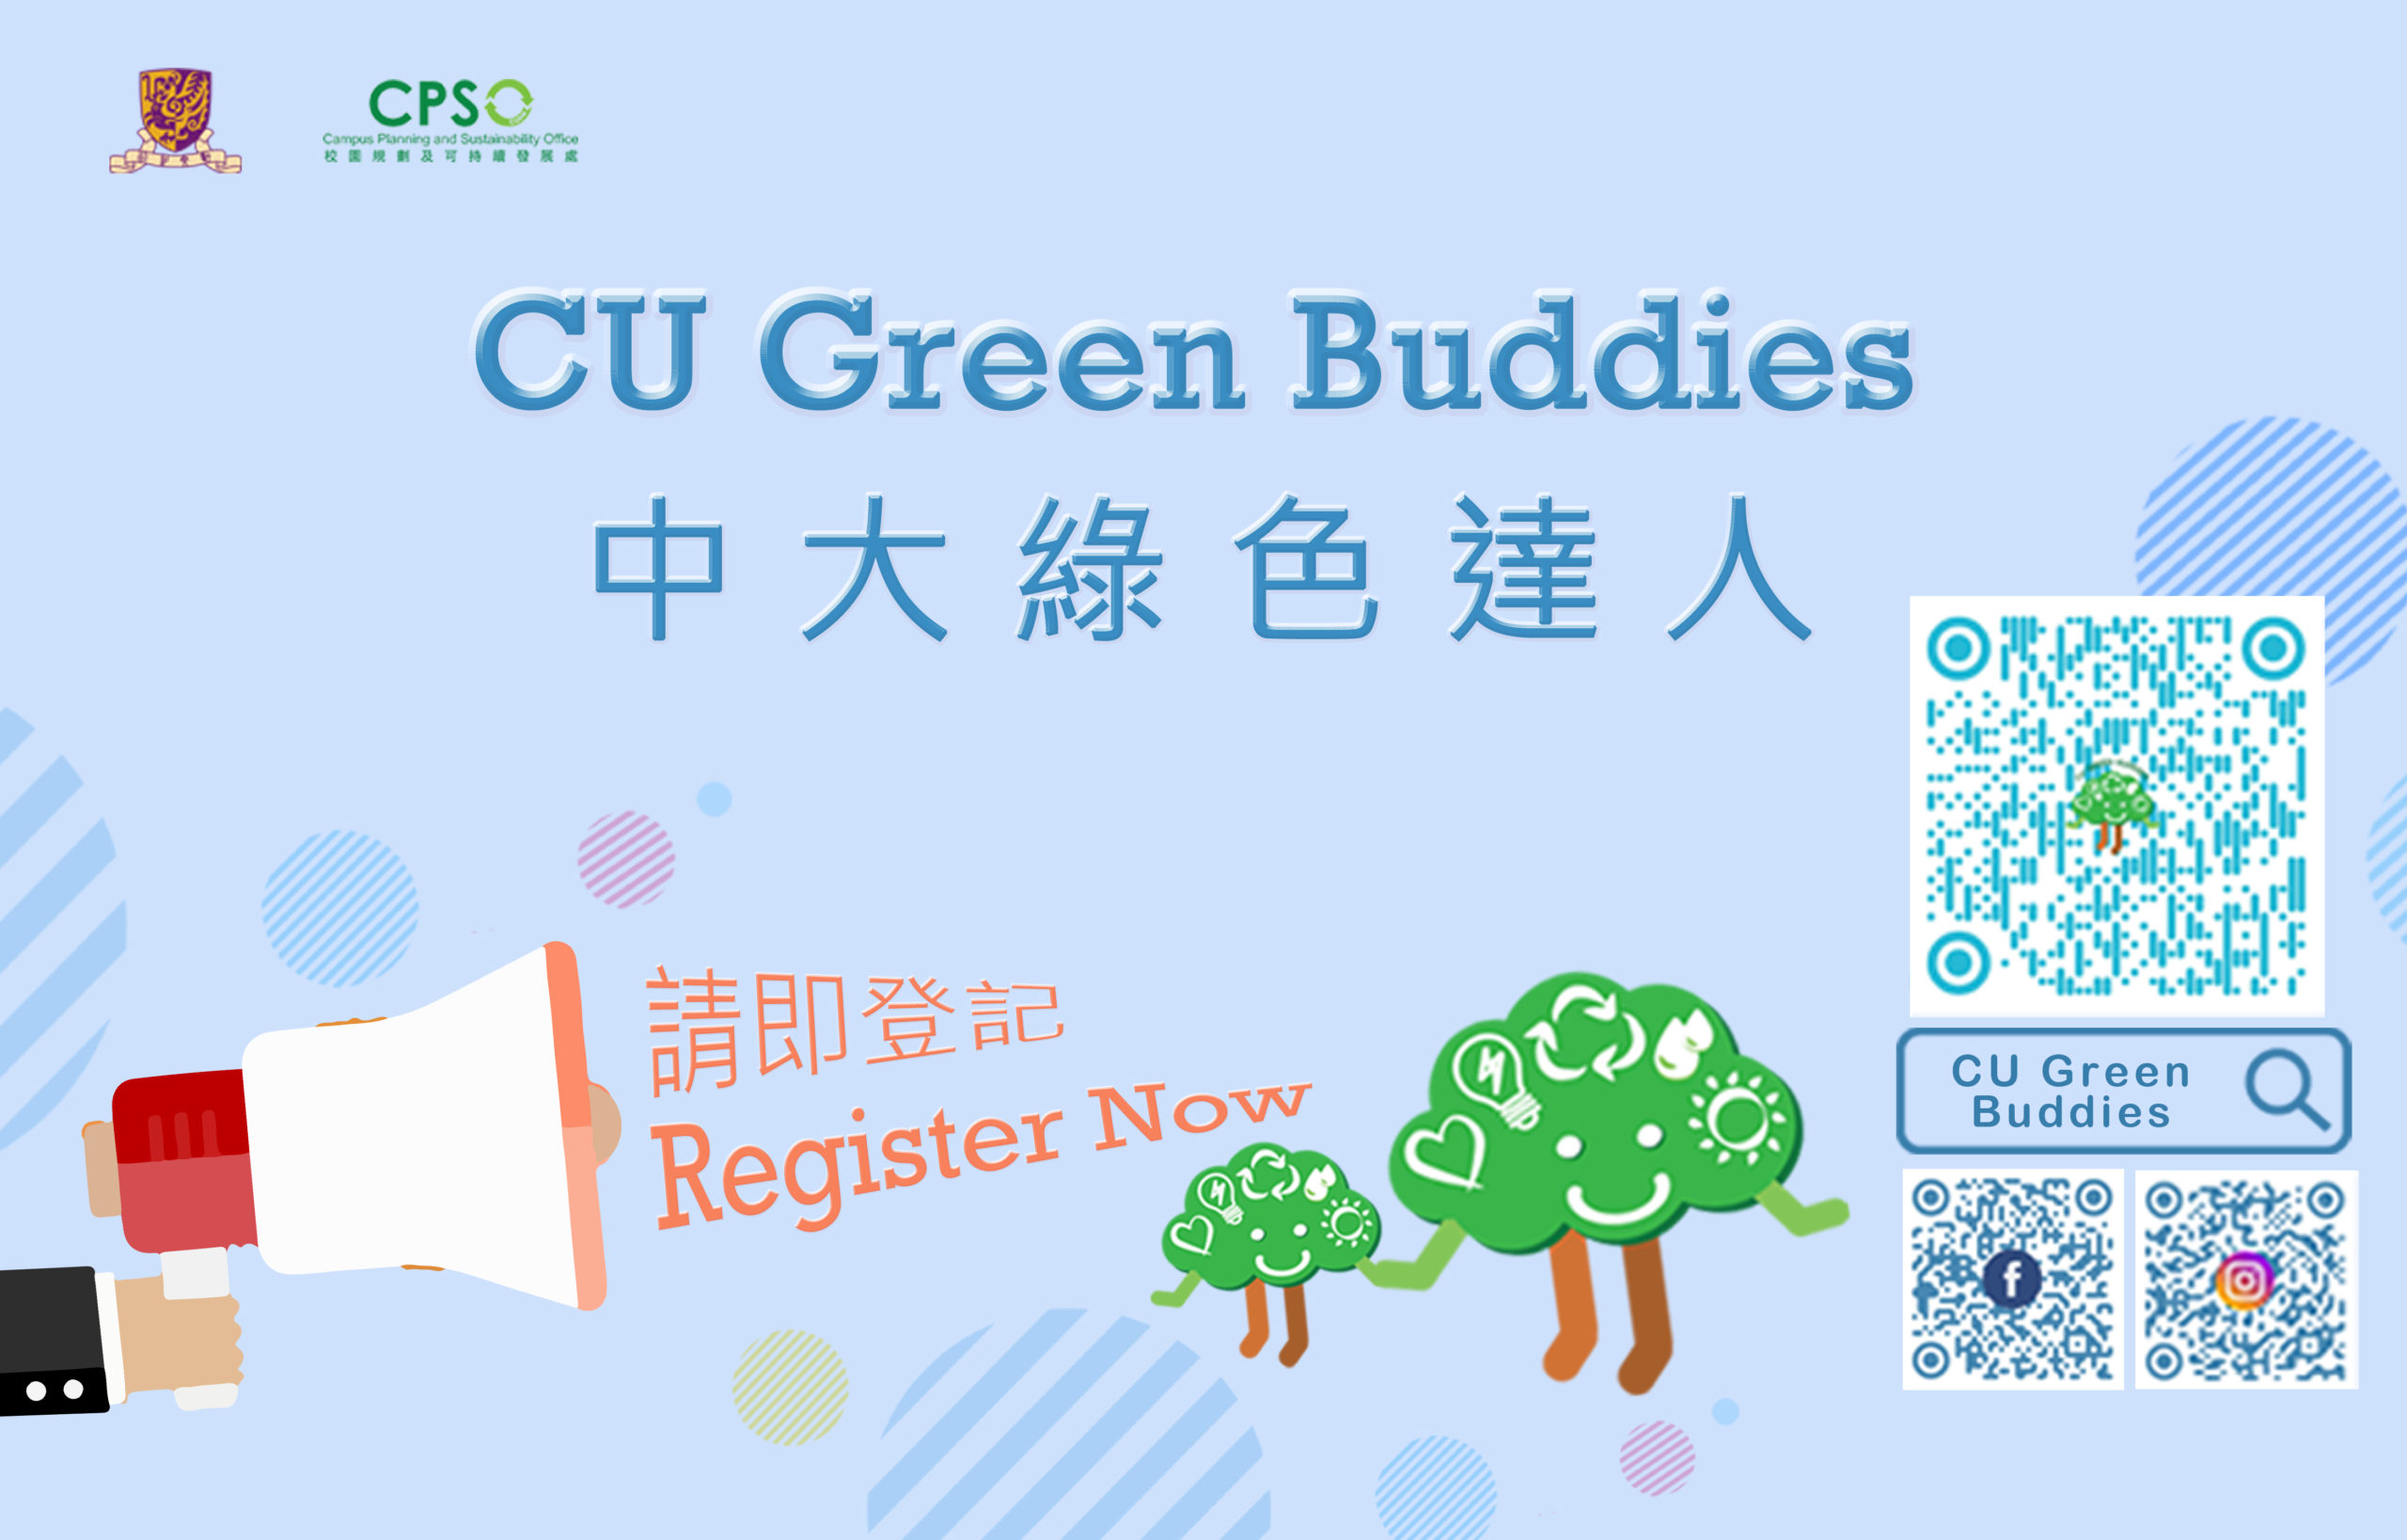 Be a CU Green Buddy – Join now to receive a gift, all students and staff are welcome!